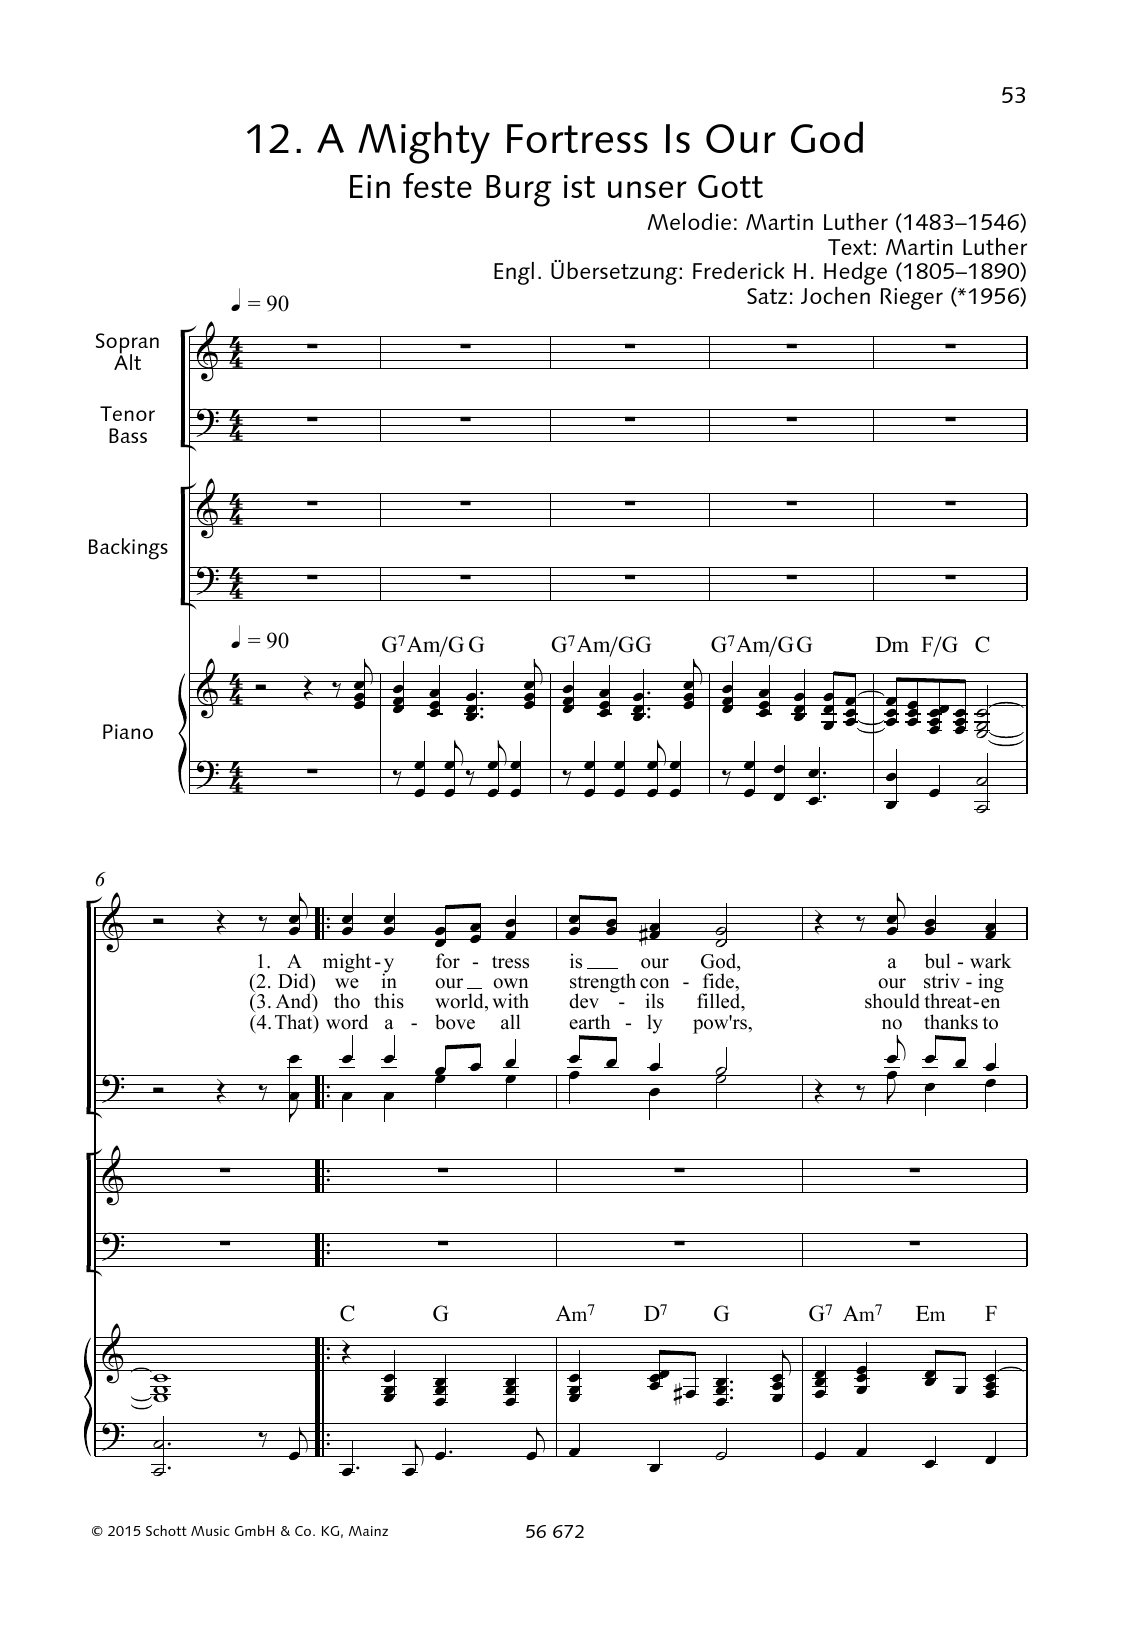 Download Martin Luther A Mighty Fortress Is Our God Sheet Music